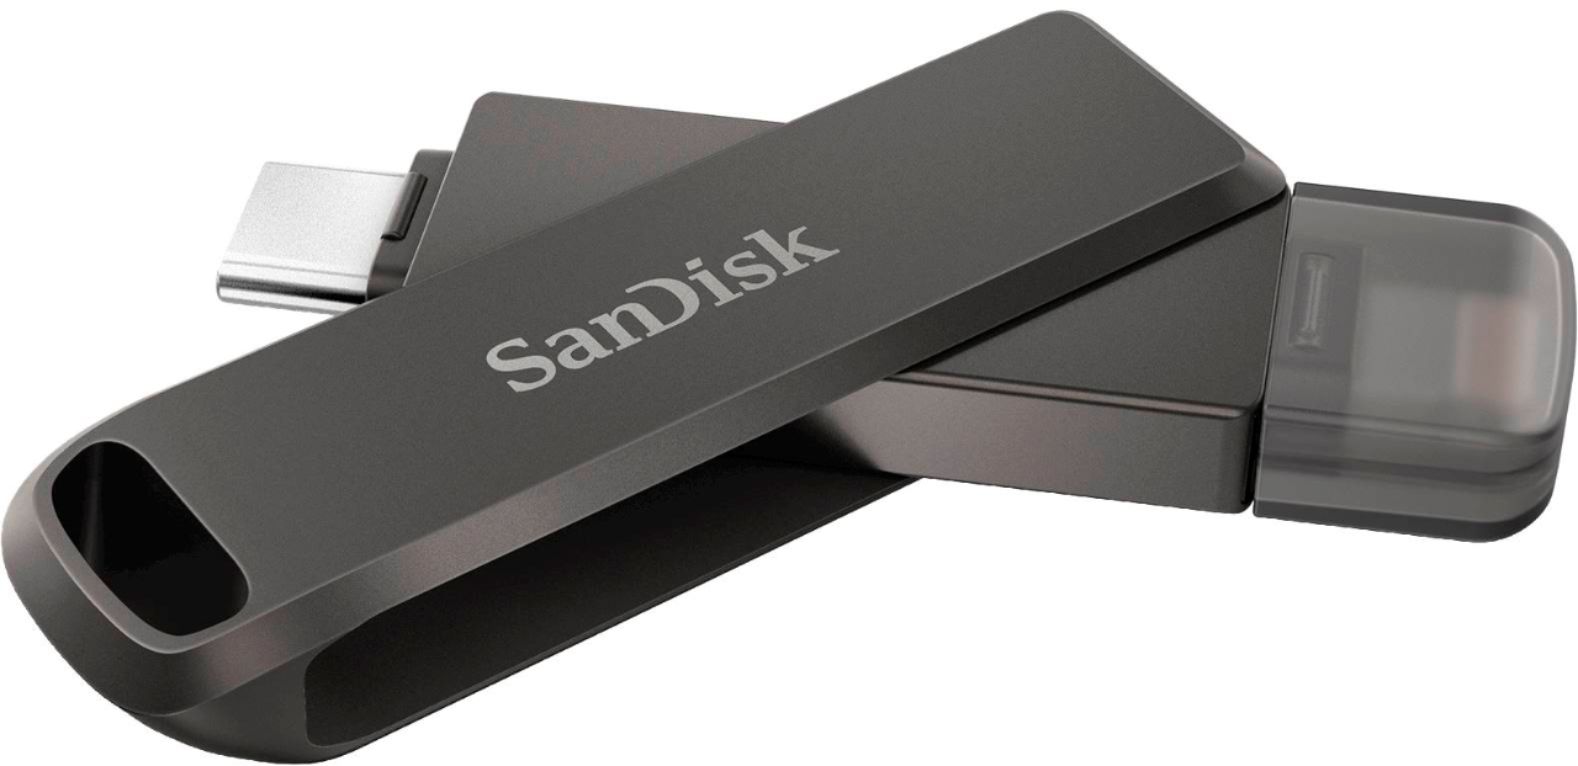 SanDisk 256GB iXpand Phone Drive Luxe for iPhone Lightning and